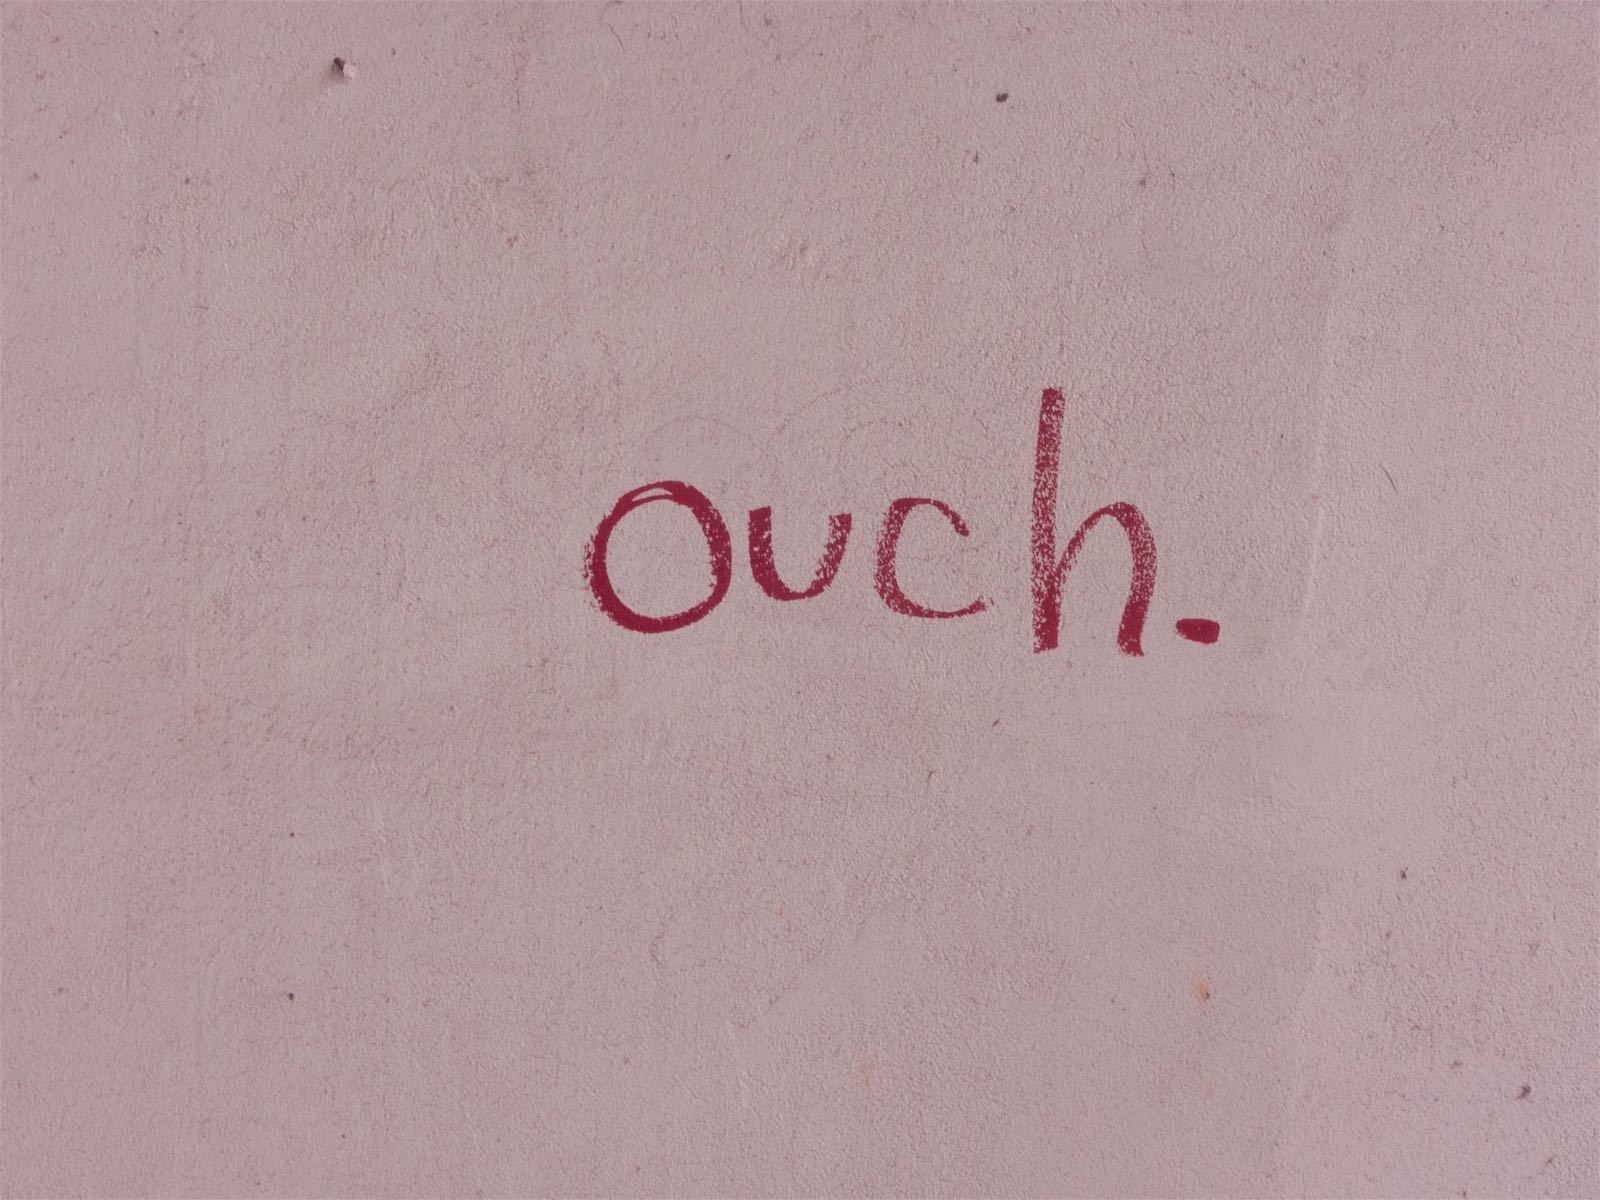 The word ouch written on a pink background